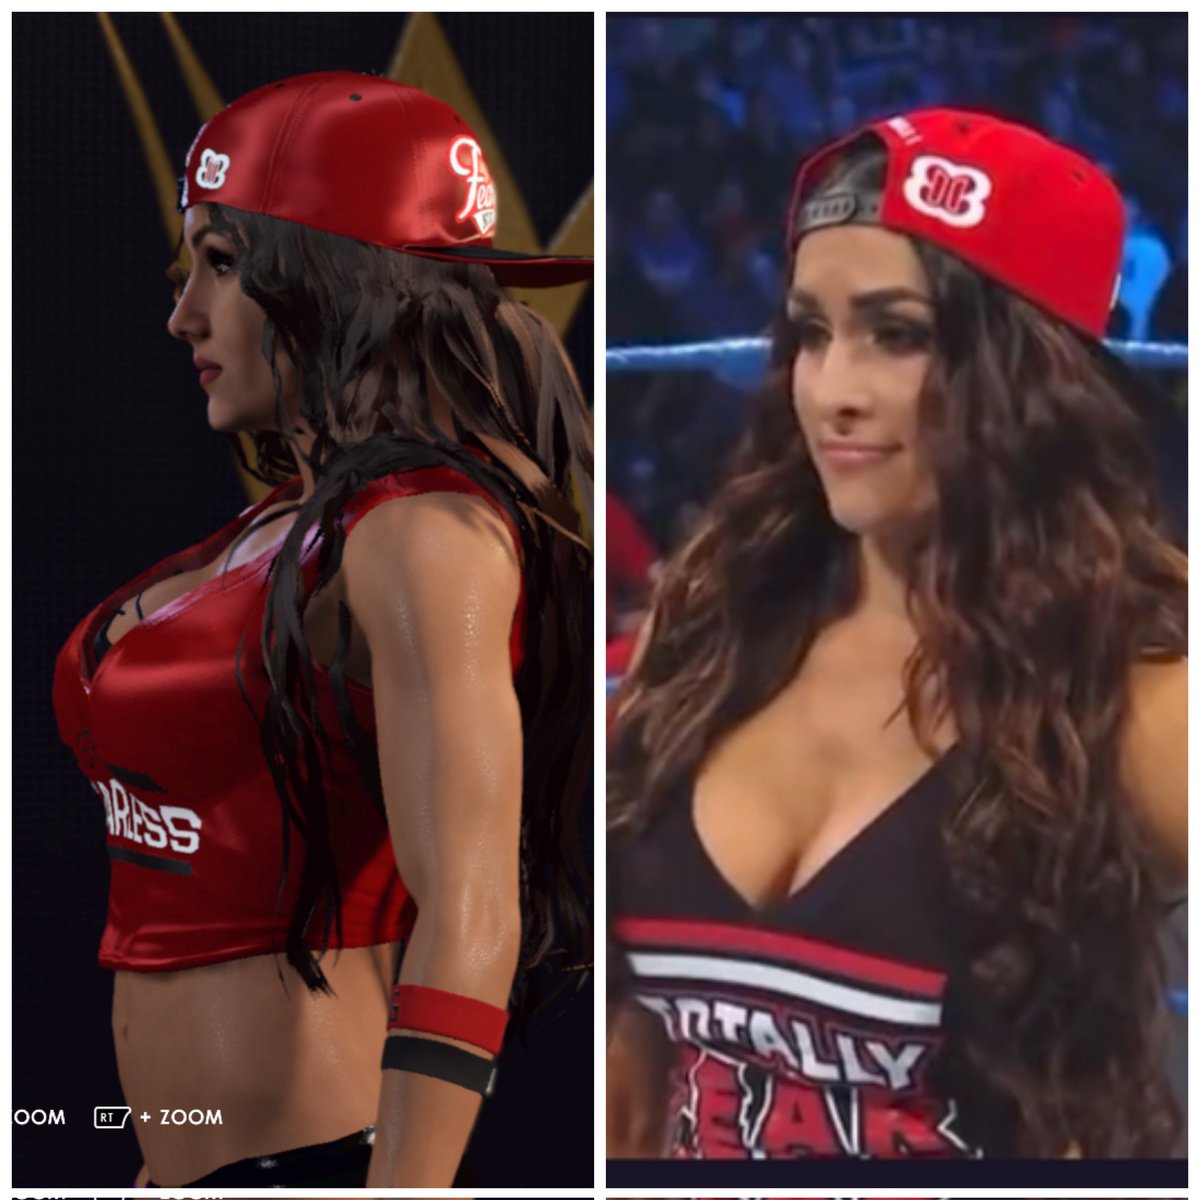 This is the Nikki Bella that I wanted in 2k23
@WhatsTheStatus @L2kgames @OfficialCAWsWS @WWEgames https://t.co/CtJ9sNjqOE